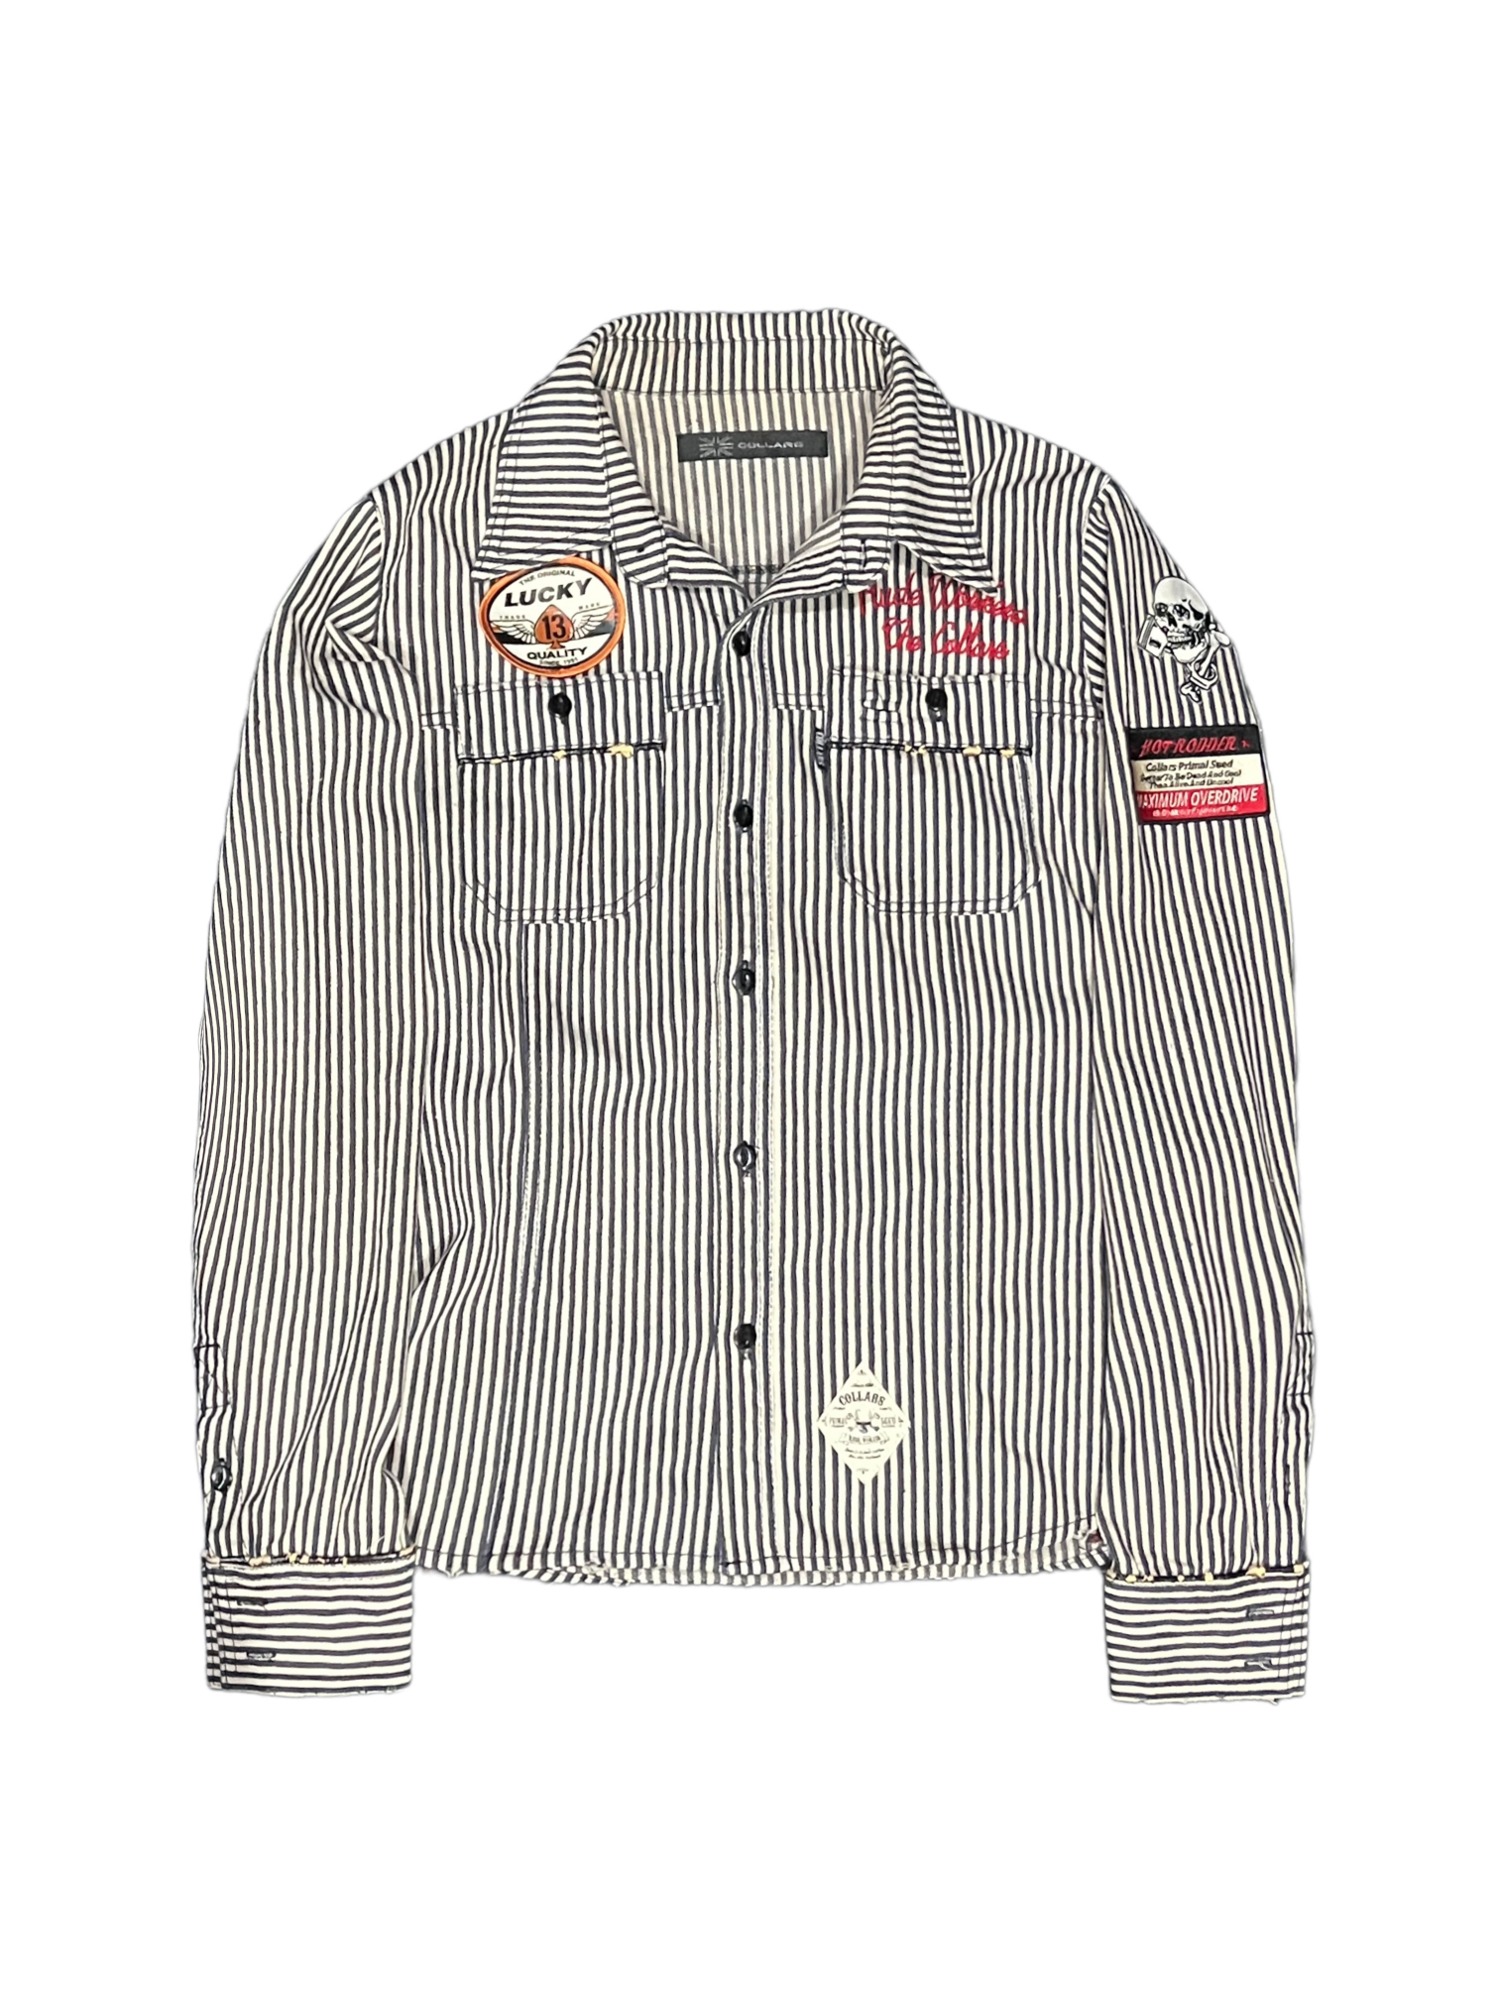 Collars Patched Stripe Pattern Shirts